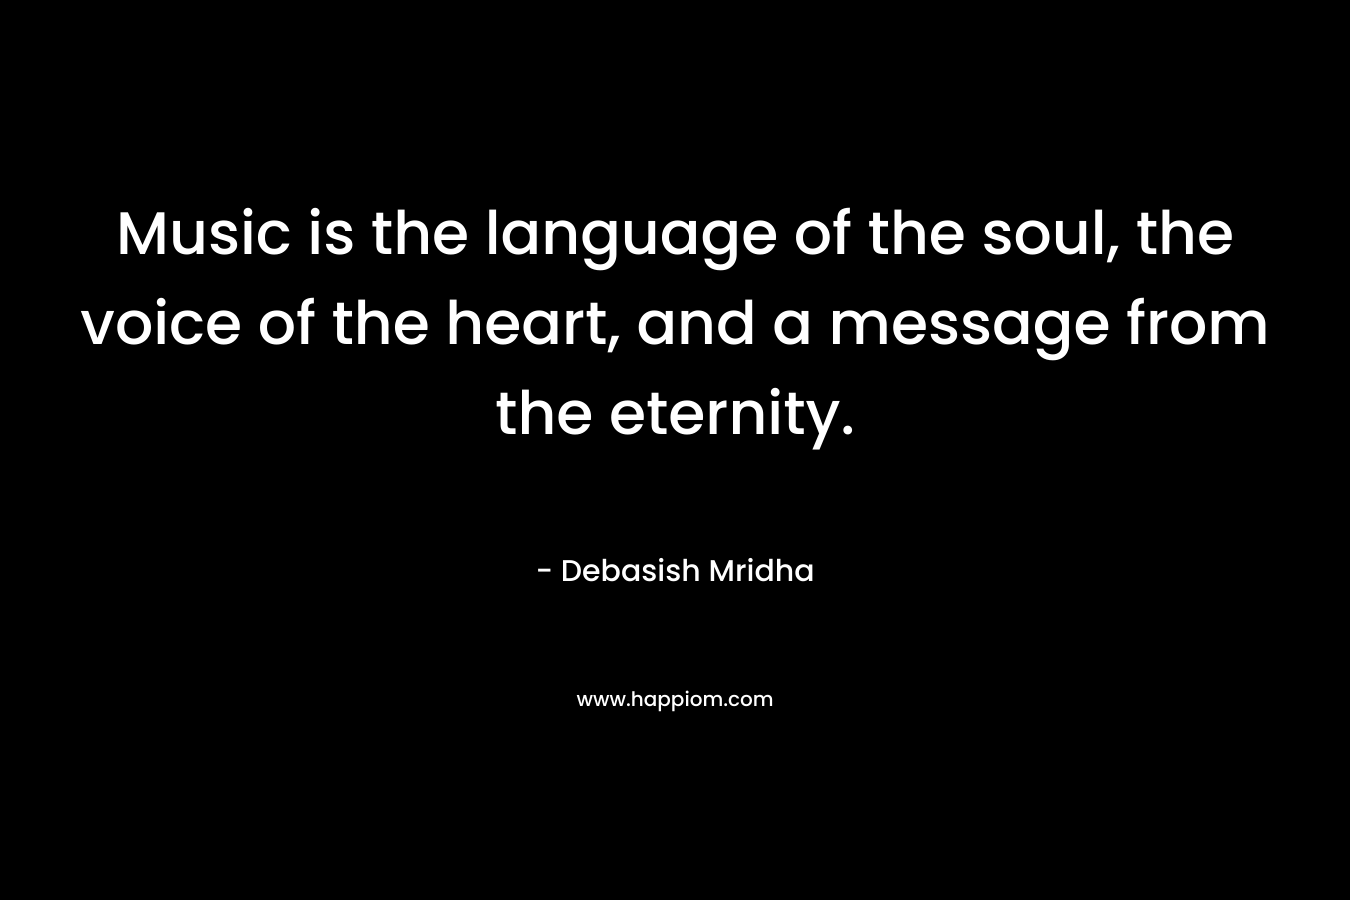 Music is the language of the soul, the voice of the heart, and a message from the eternity.